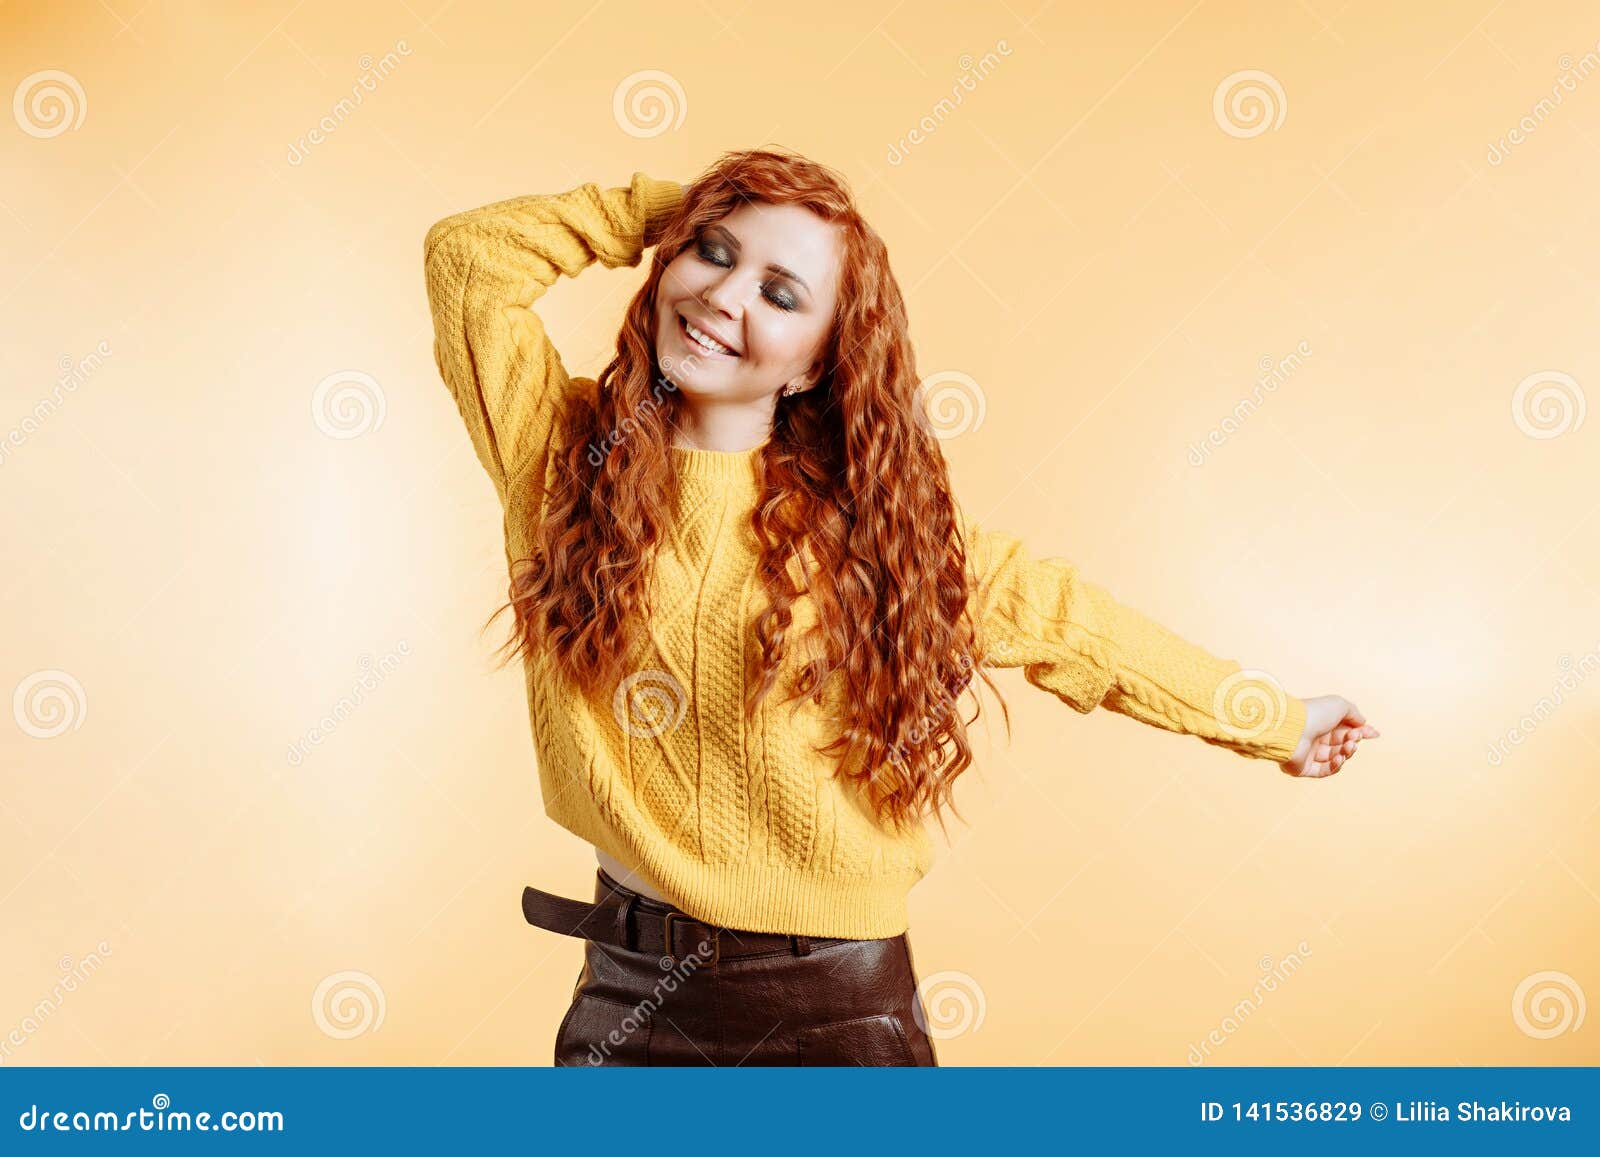 Redhead Woman Dancing With Happiness Face Expression Stock Image